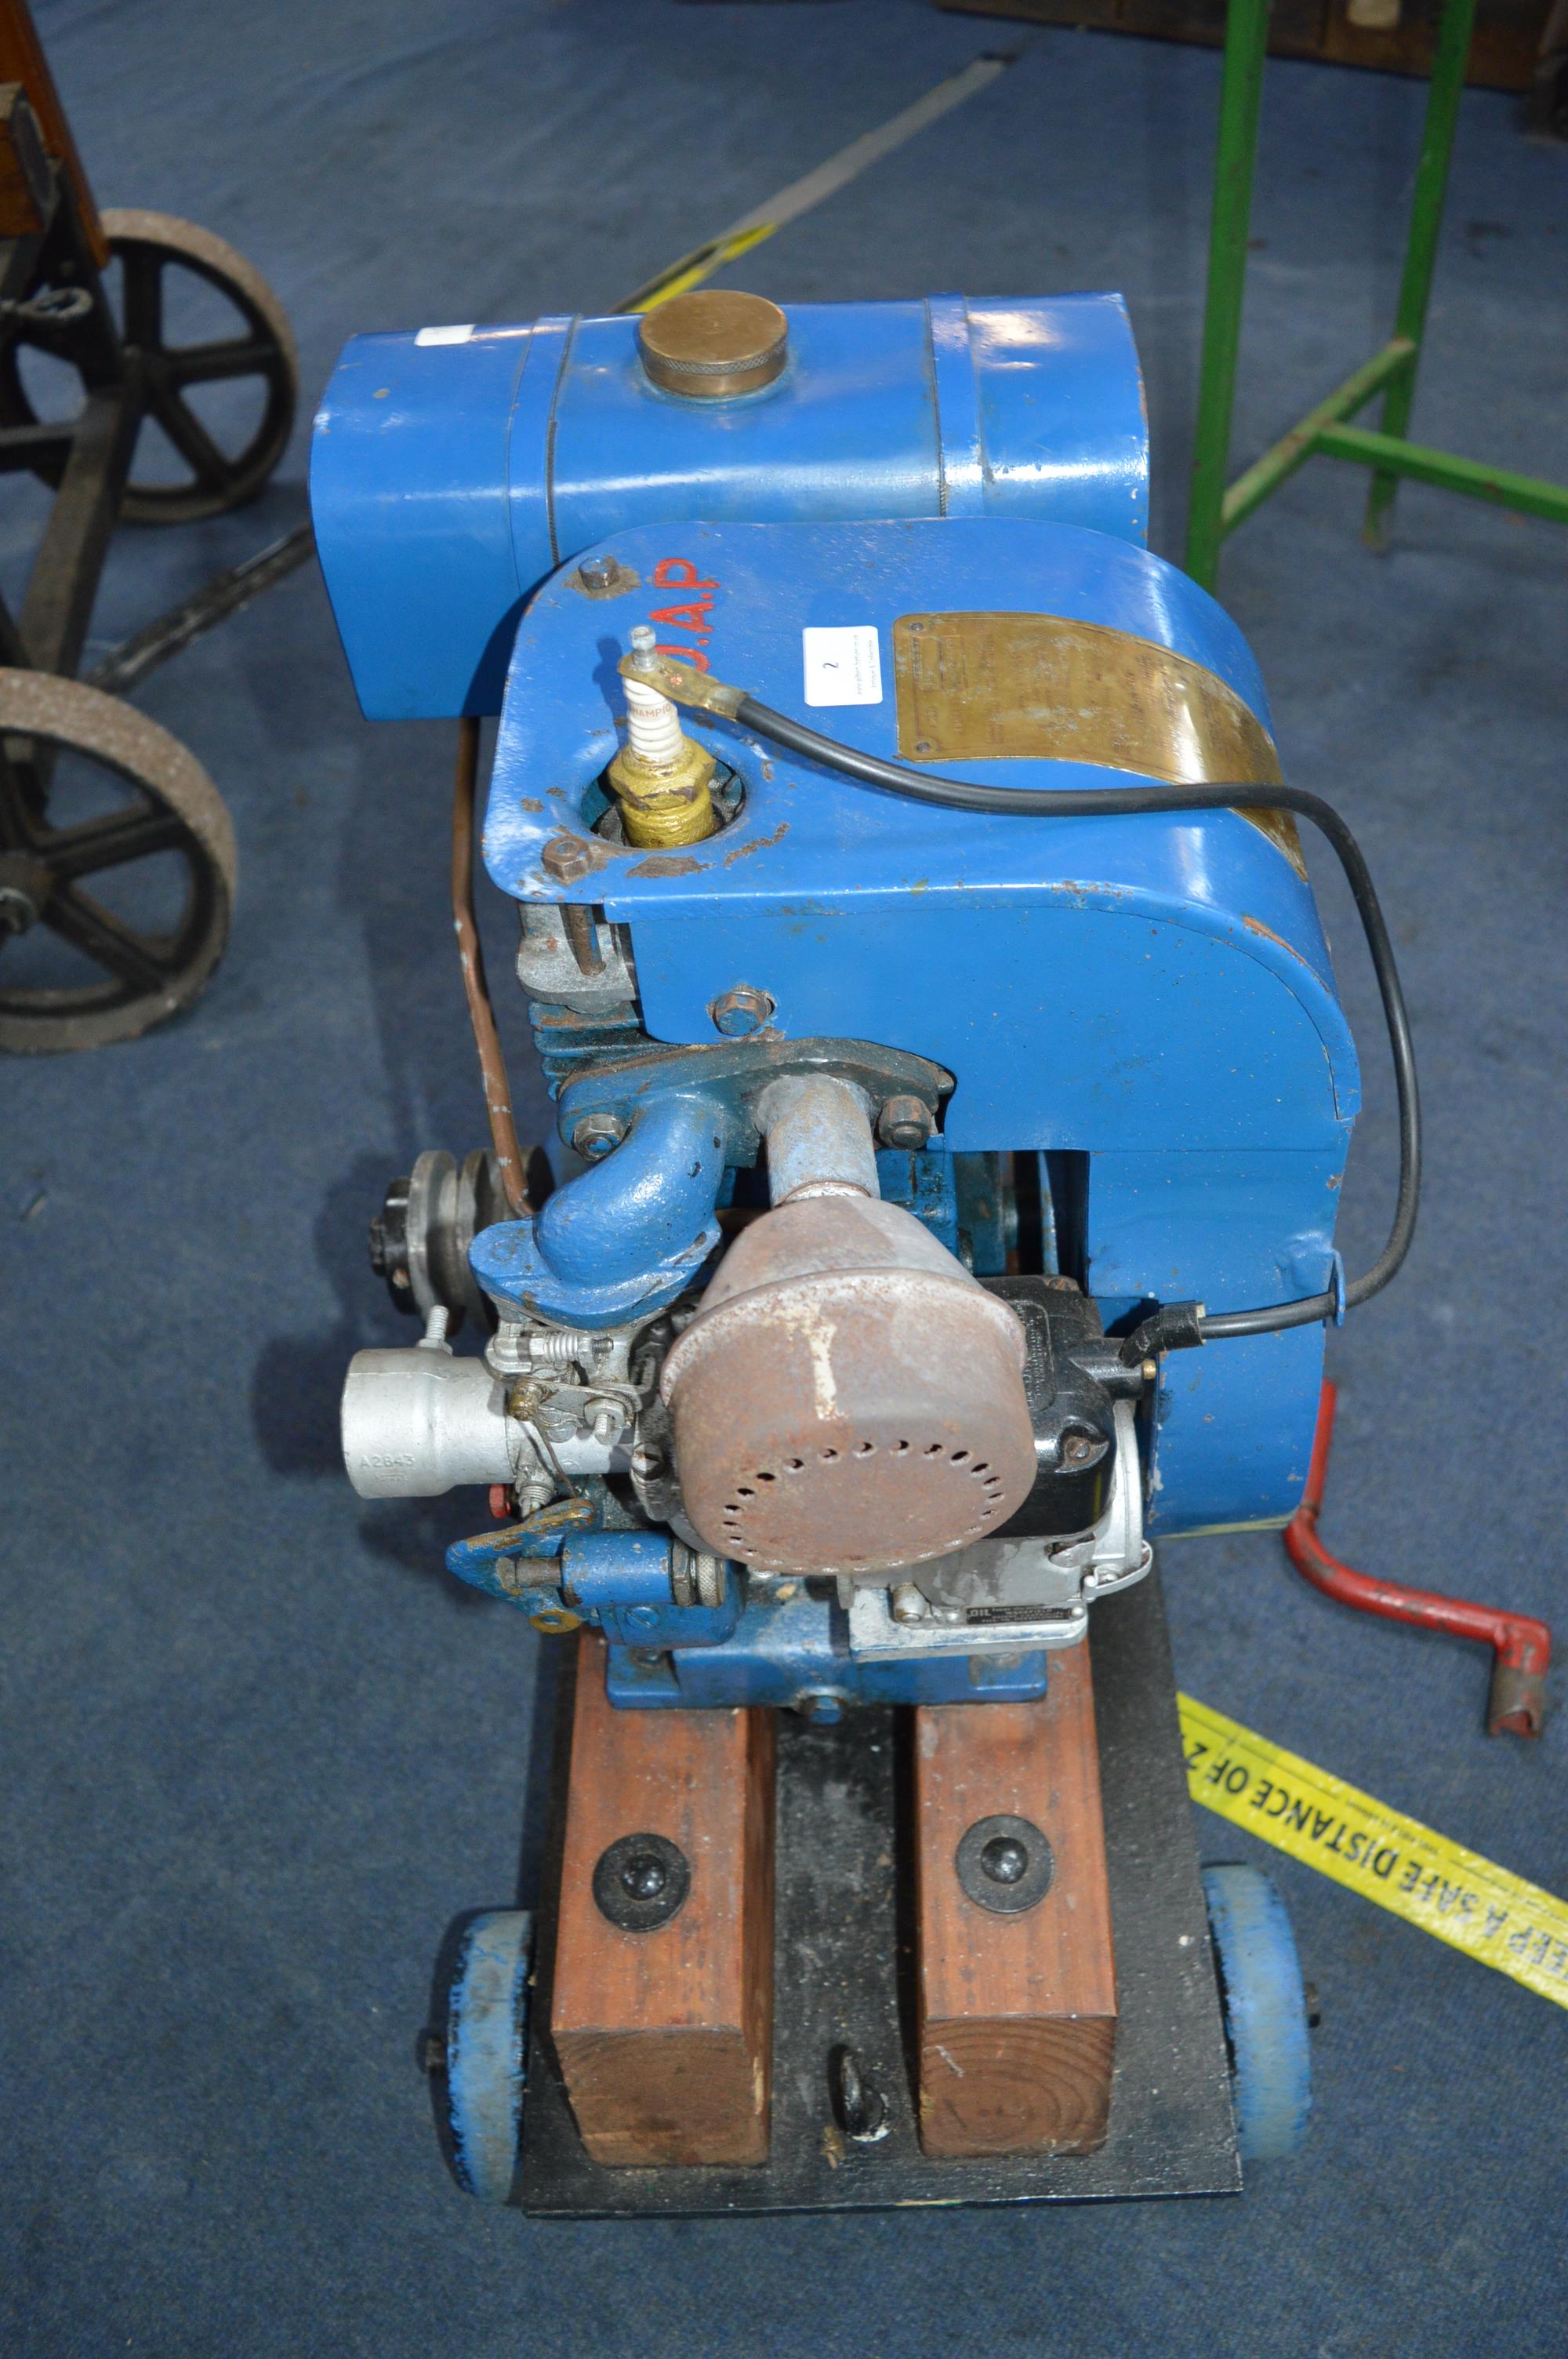 Jap Model 4/2 Stationary Engine Mounted on Trolley - Image 2 of 4